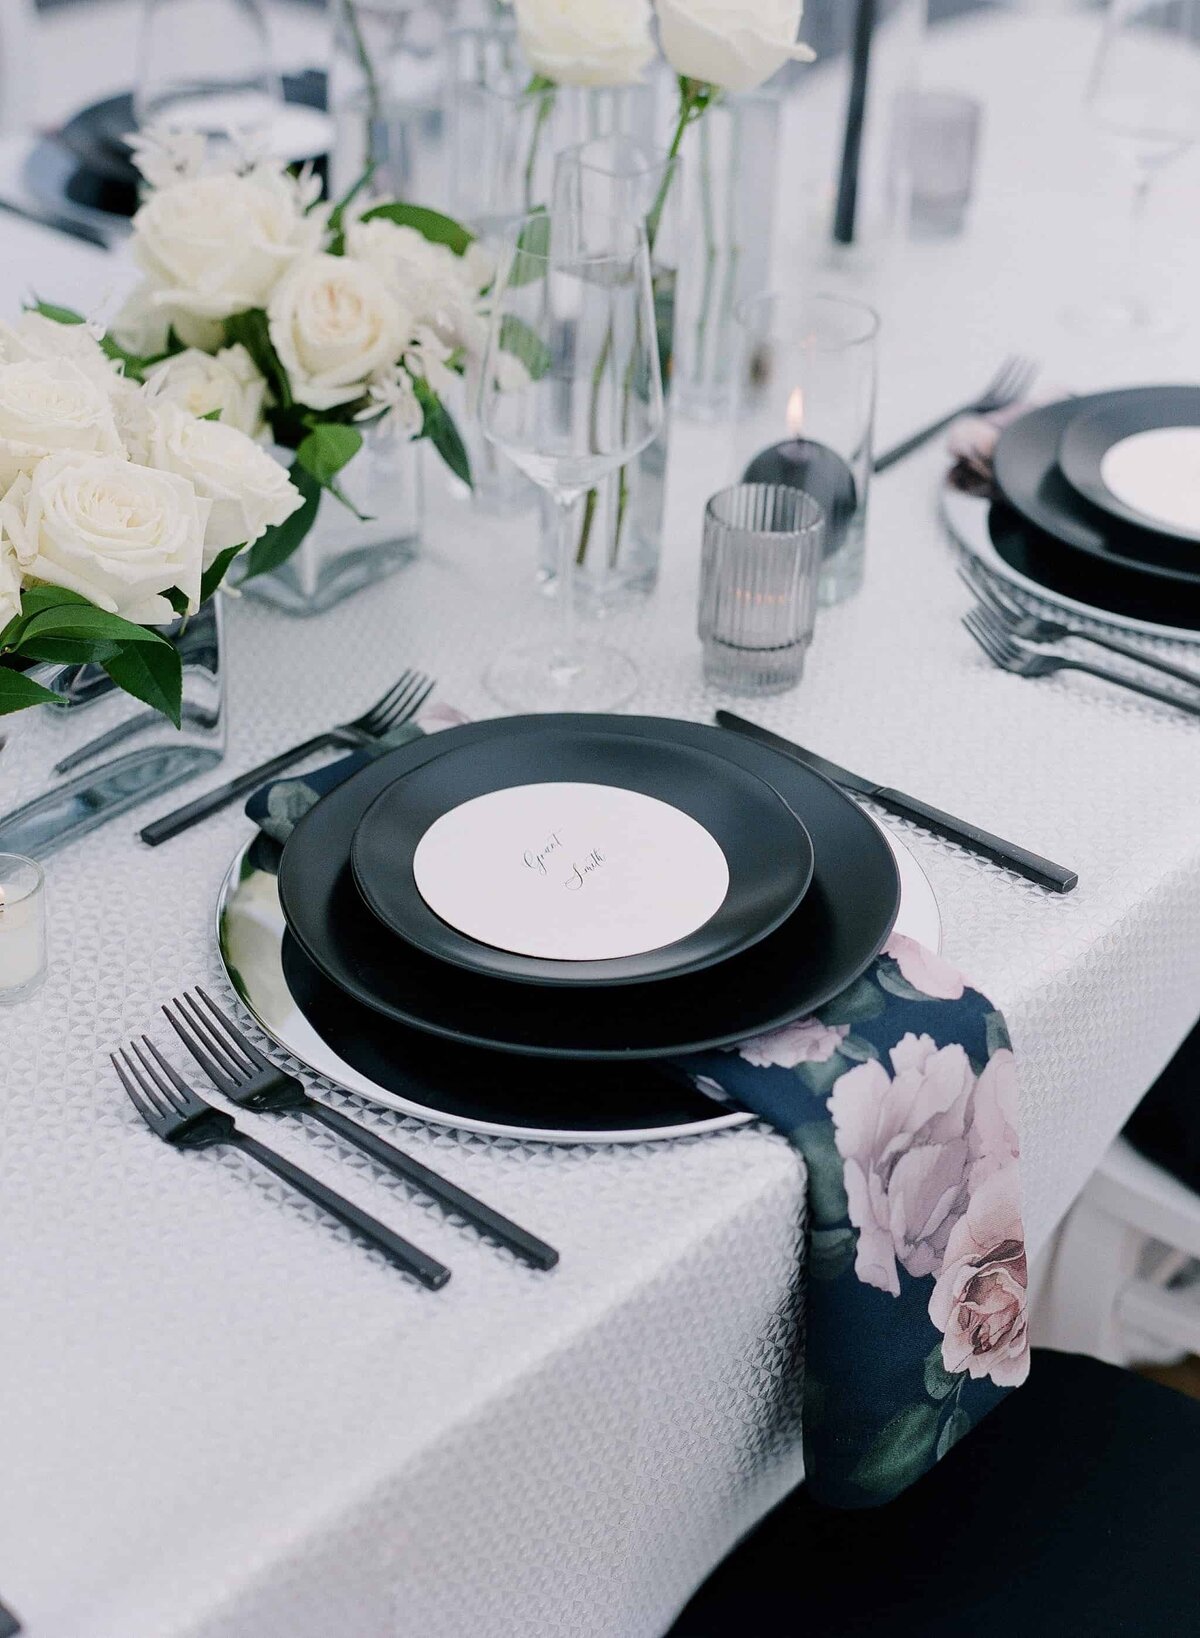 Black and white wedding table settings